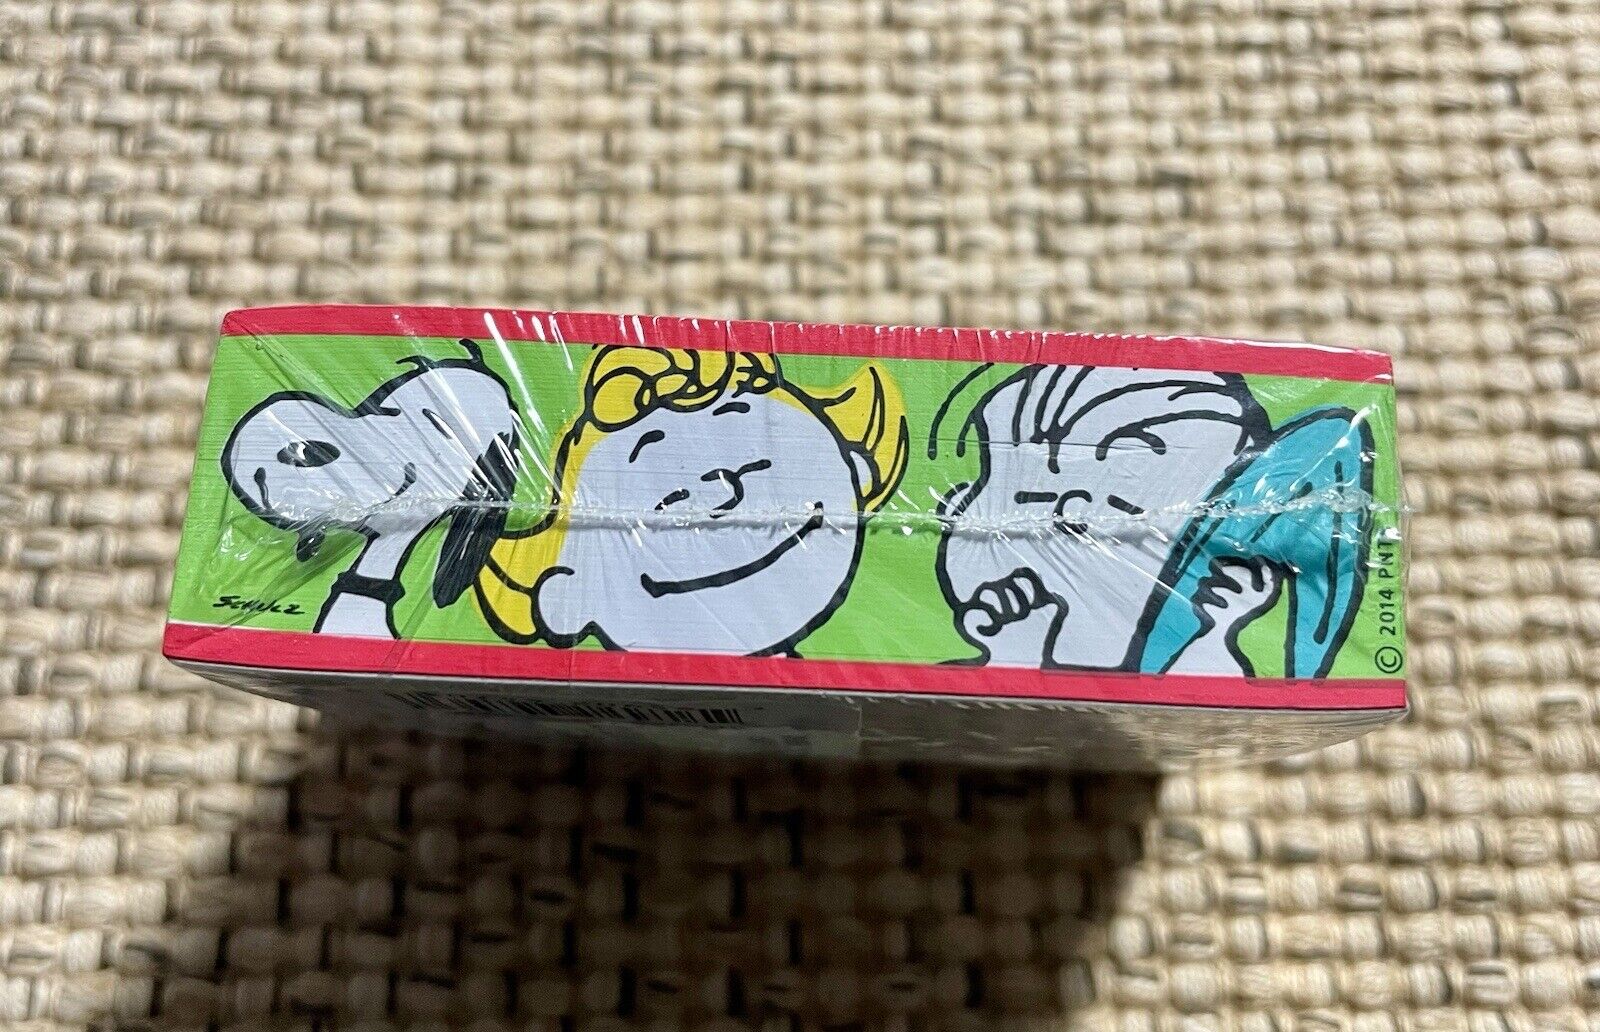 Peanuts Snoopy Note Pad. New/Sealed With Snoopy Linus & Lucy Featured On Outside